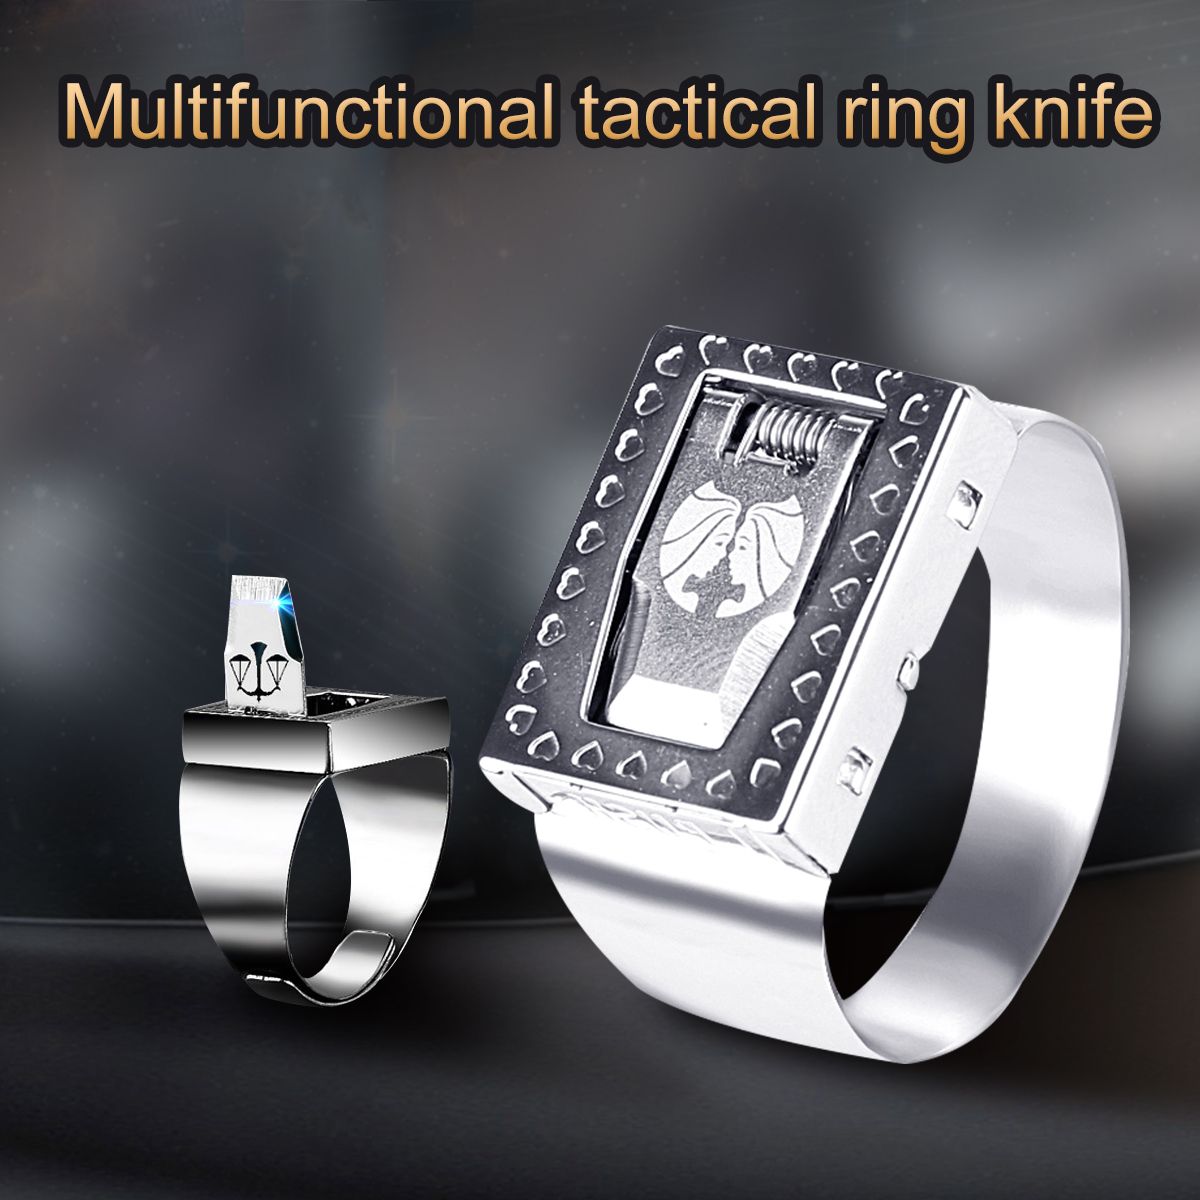 12-Constellation-Self-Protection-Ring-Body-Guard-Ring-Invisibility-Hidden-Ring-Blade-Emergency-Rescu-1423398